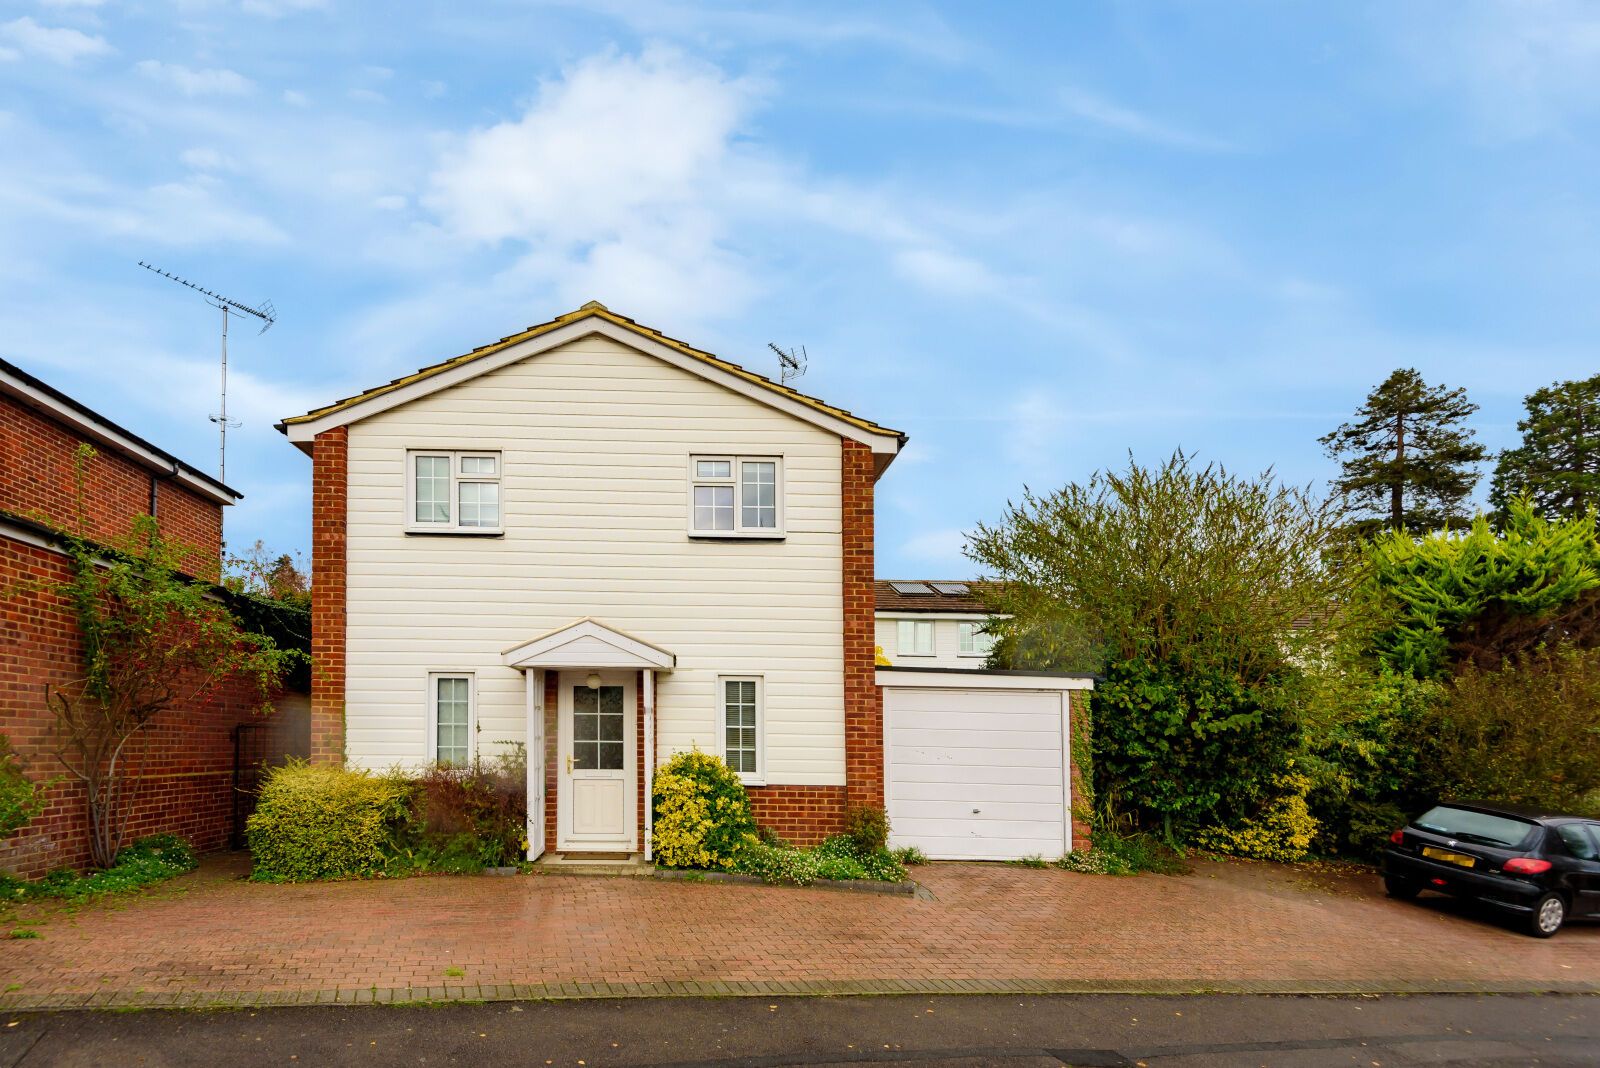 4 bedroom detached house for sale Milton Close, Henley-on-Thames, RG9, main image